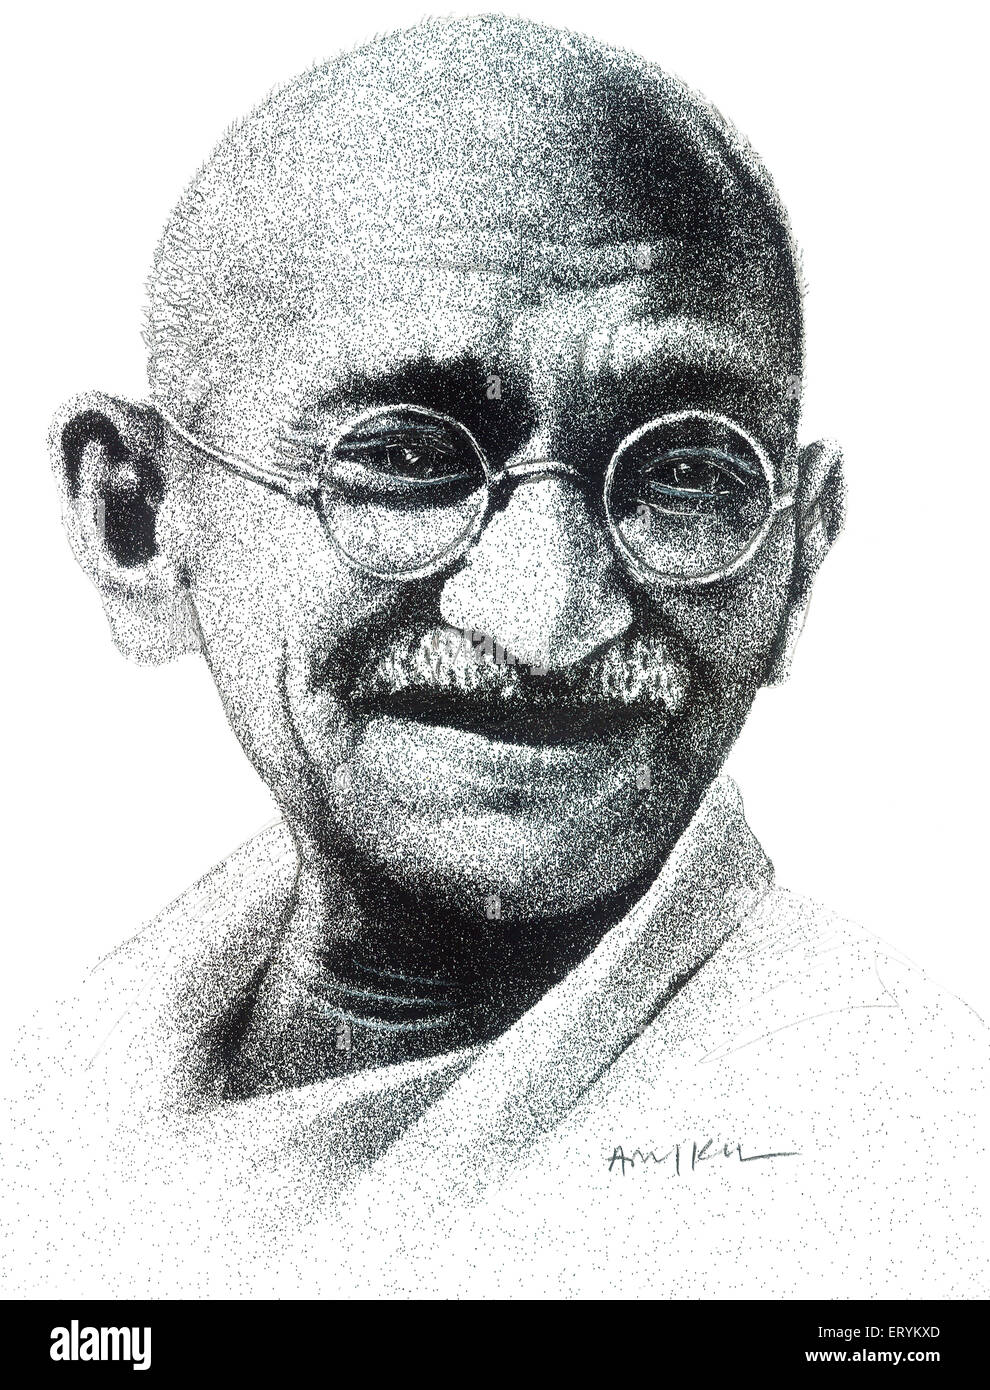 6 Lessons to teach kids from Mahatma Gandhi's life - Kreativemommy